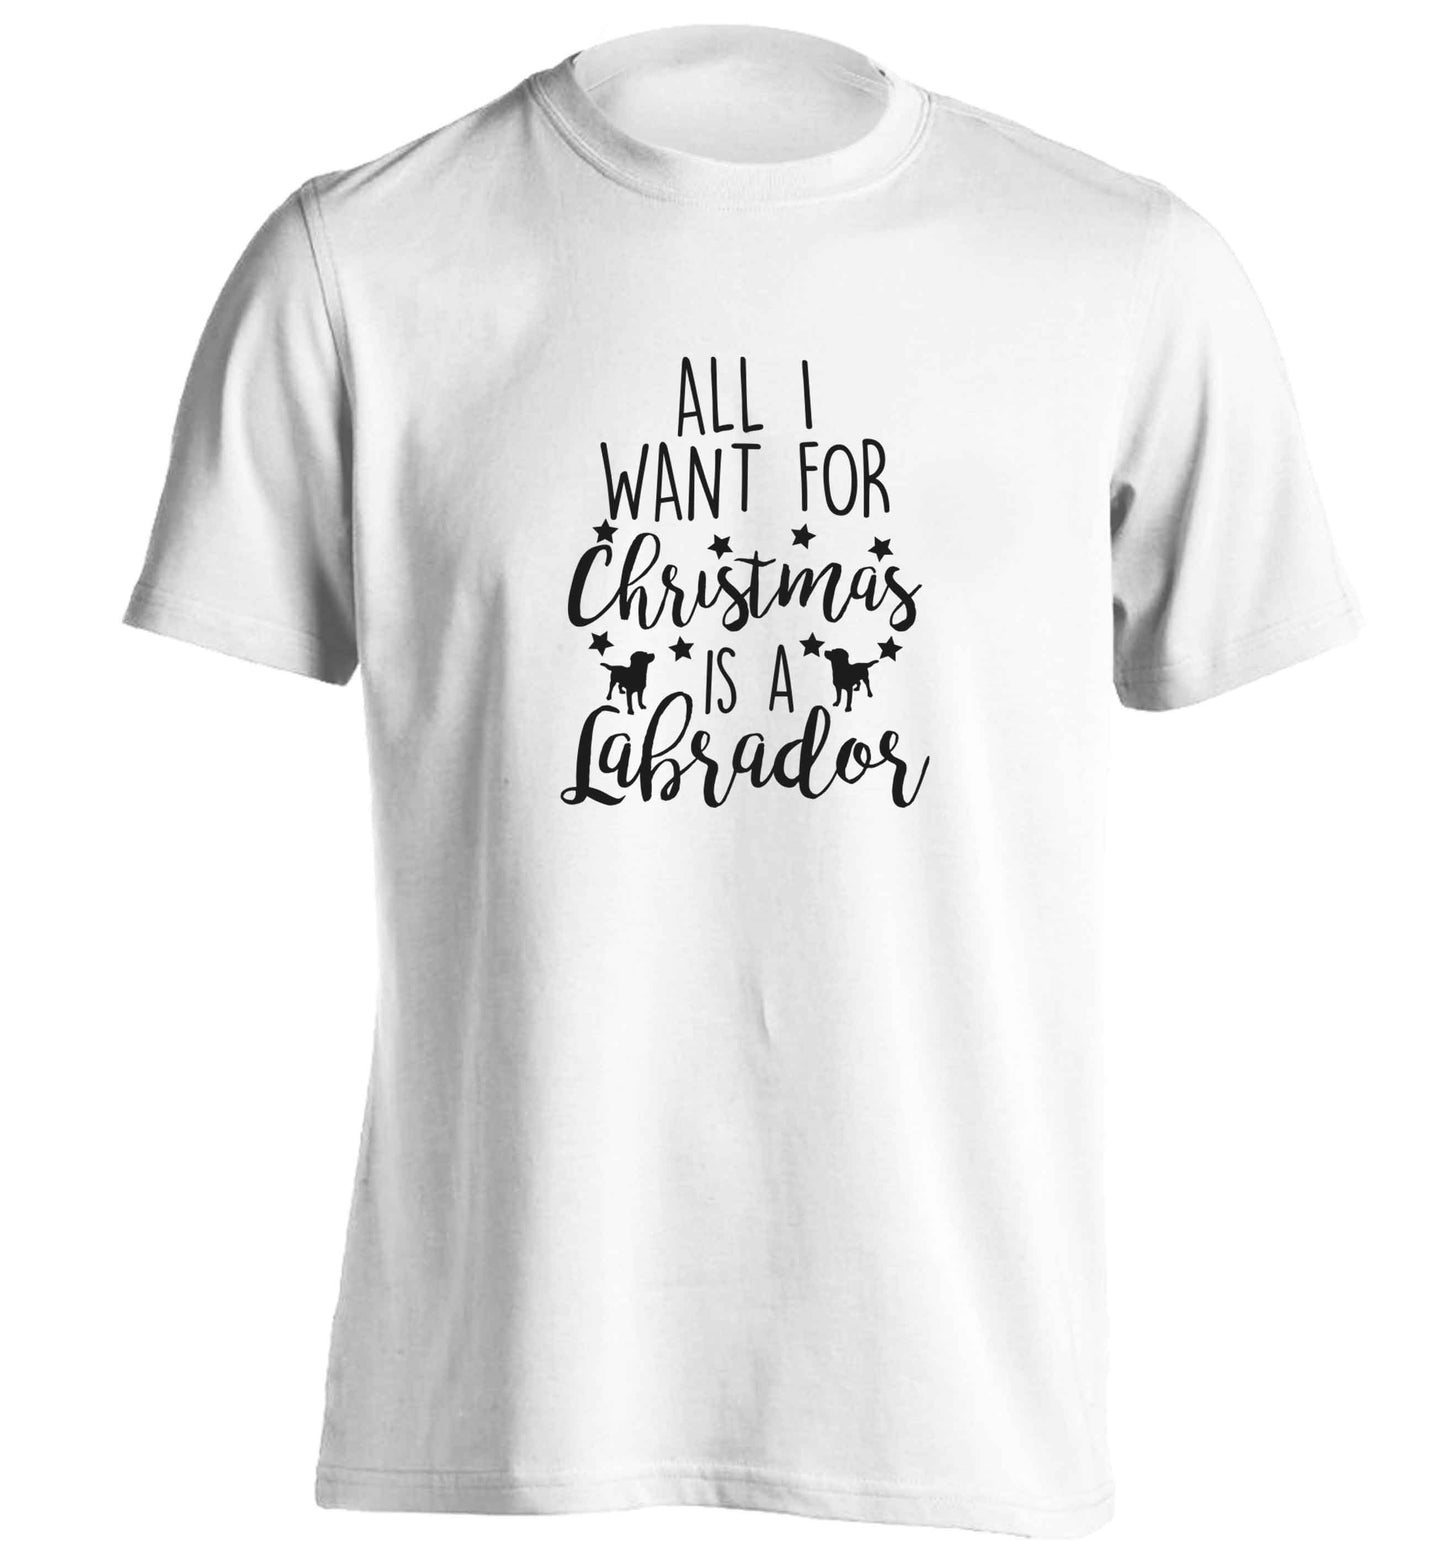 All I want for Christmas is a labrador adults unisex white Tshirt 2XL